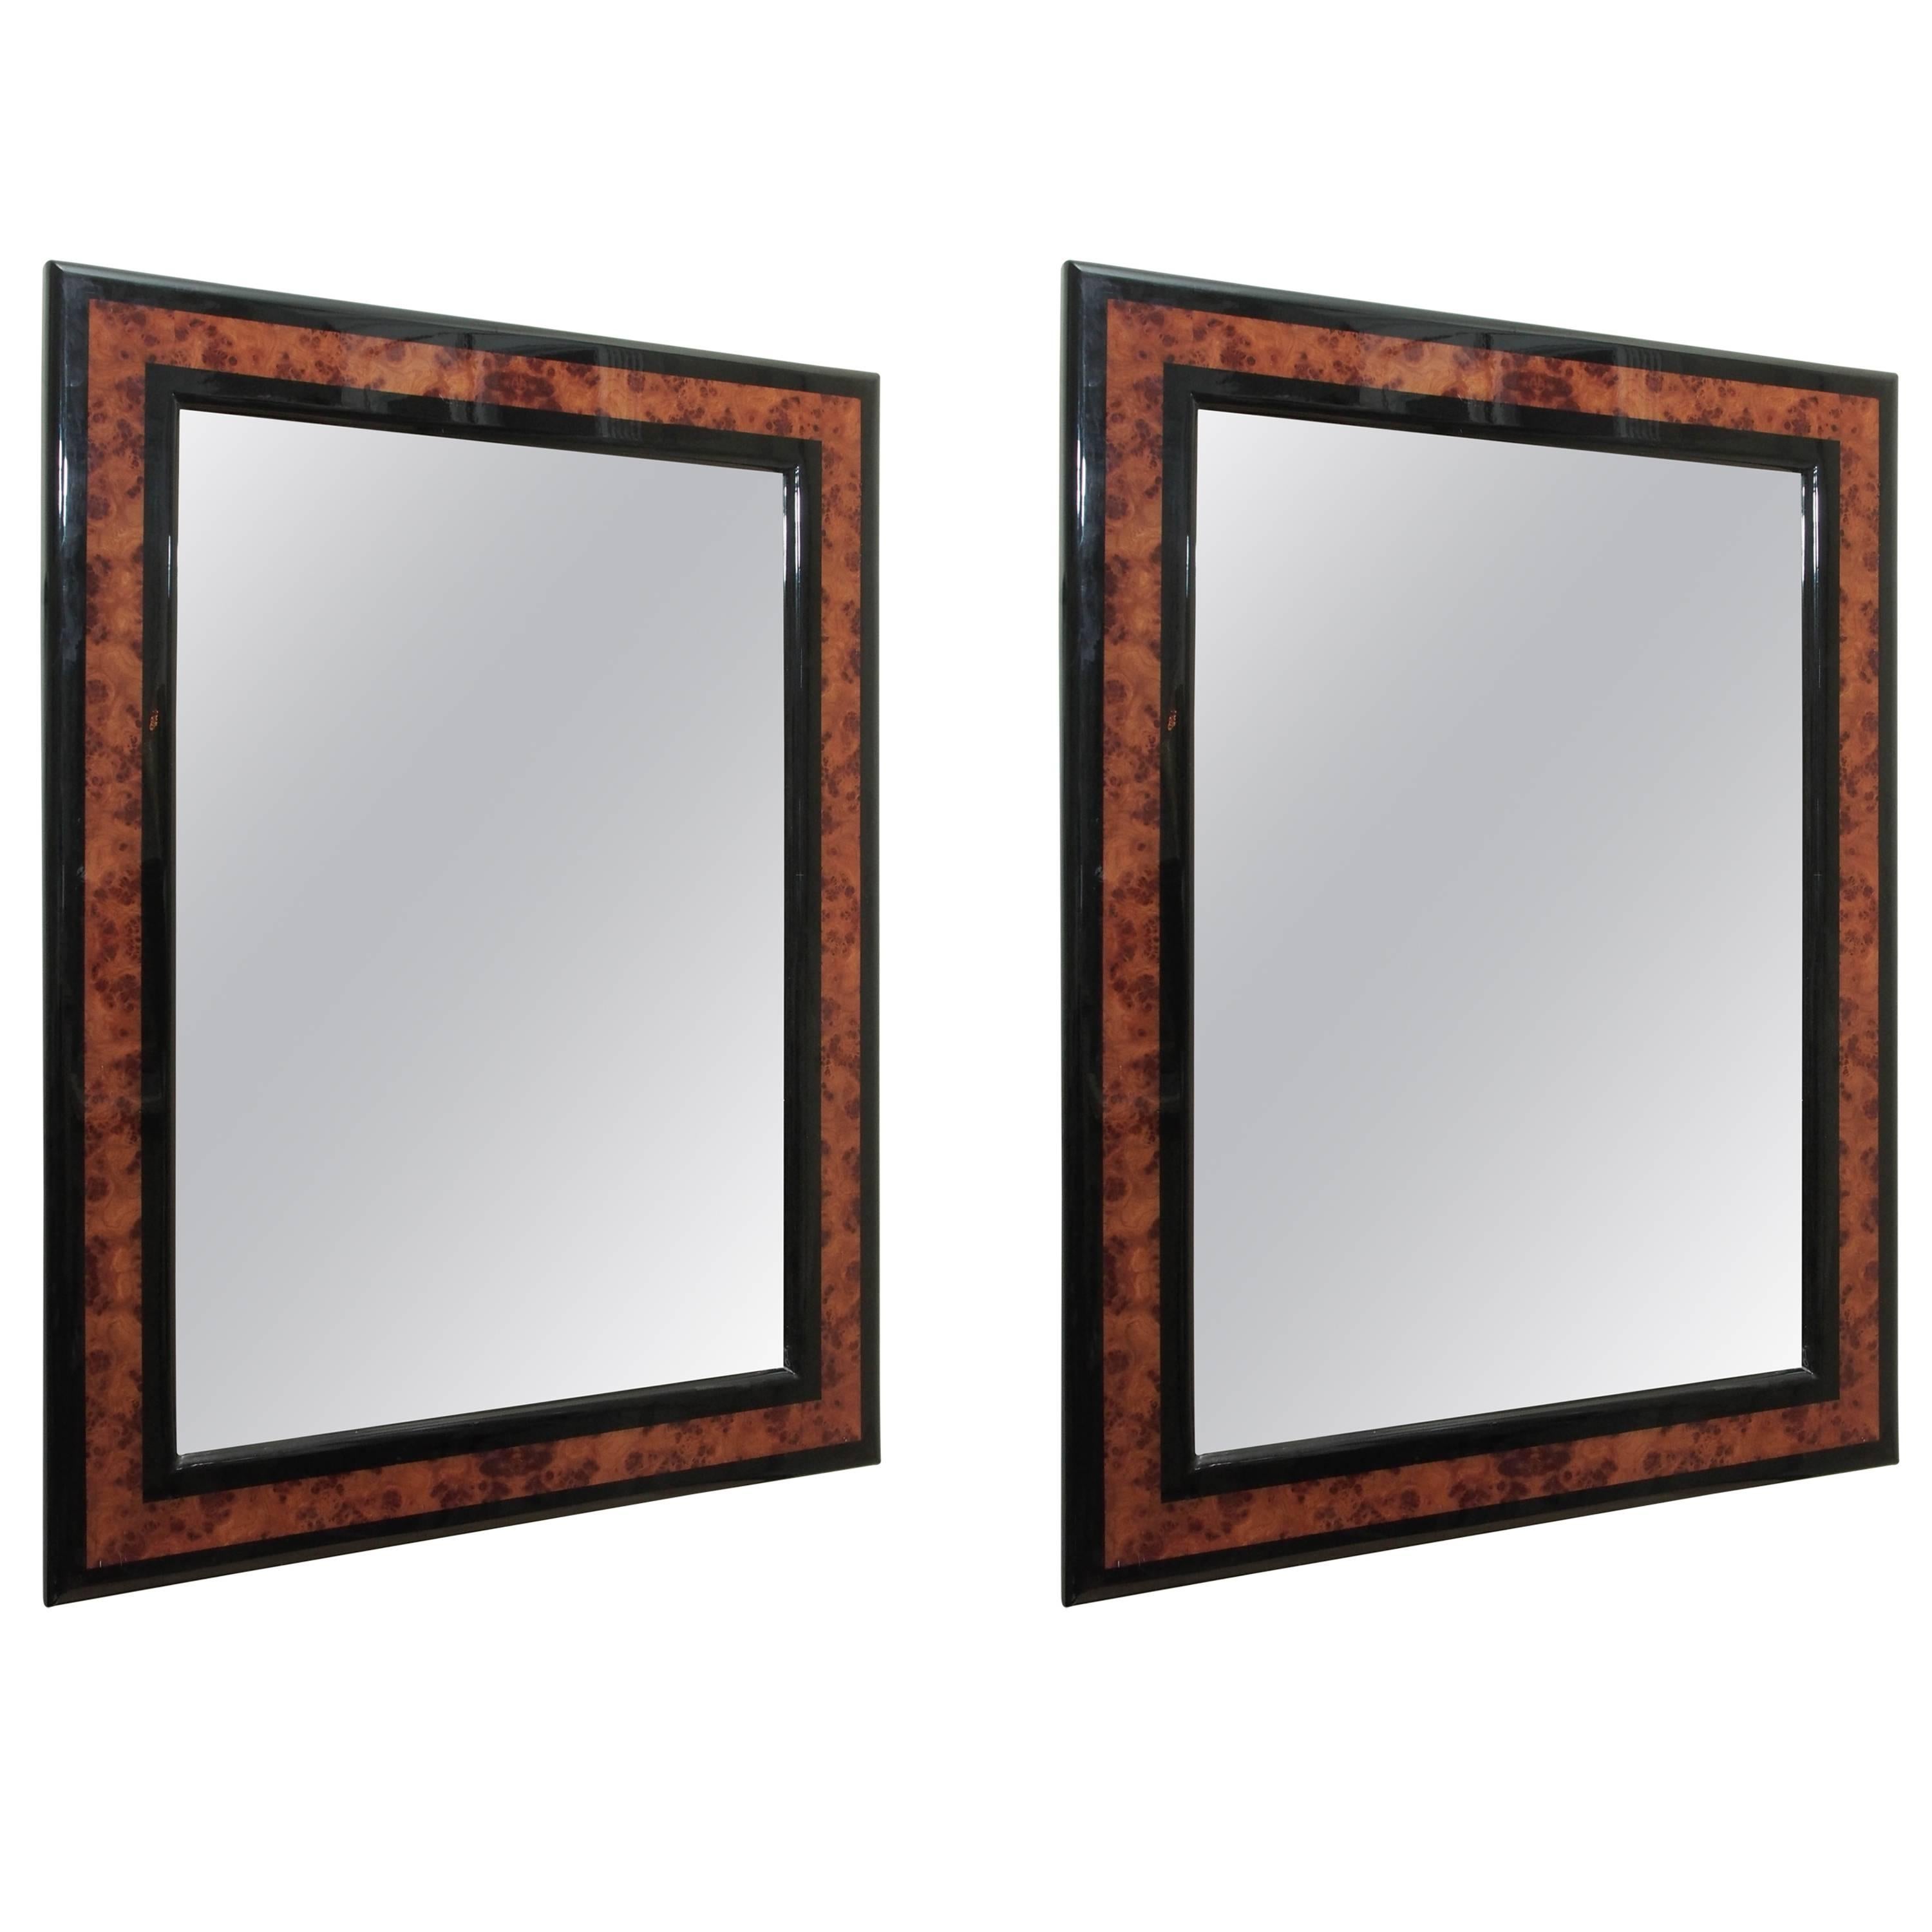 Pair of Burled Wood and Ebony Mid-Century Mirrors, circa 1970 For Sale